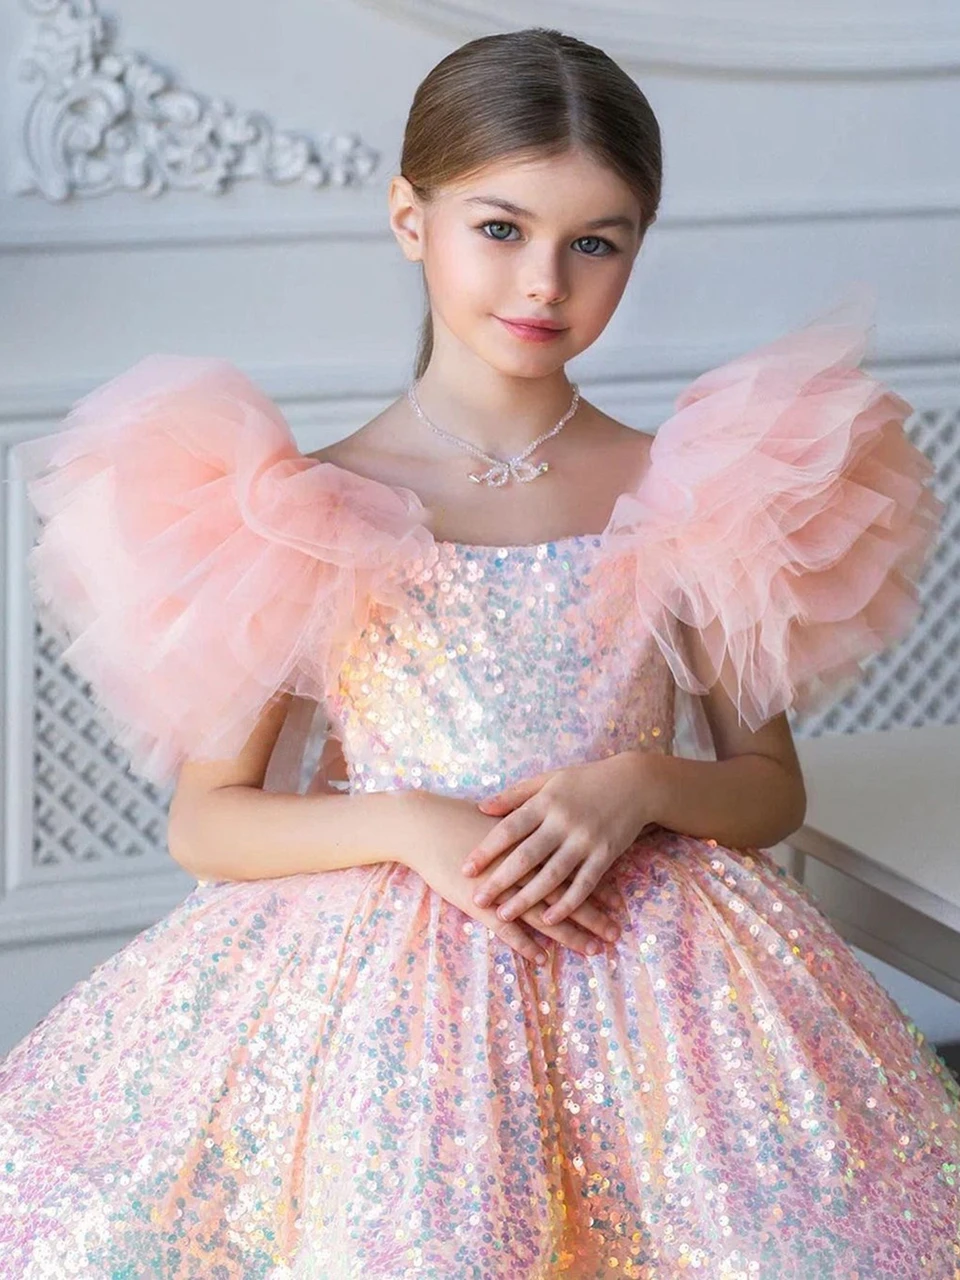 flower-girl-dresses-for-wedding-ruffles-tiered-skirts-toddler-pageant-gowns-tulle-children-first-communion-dress